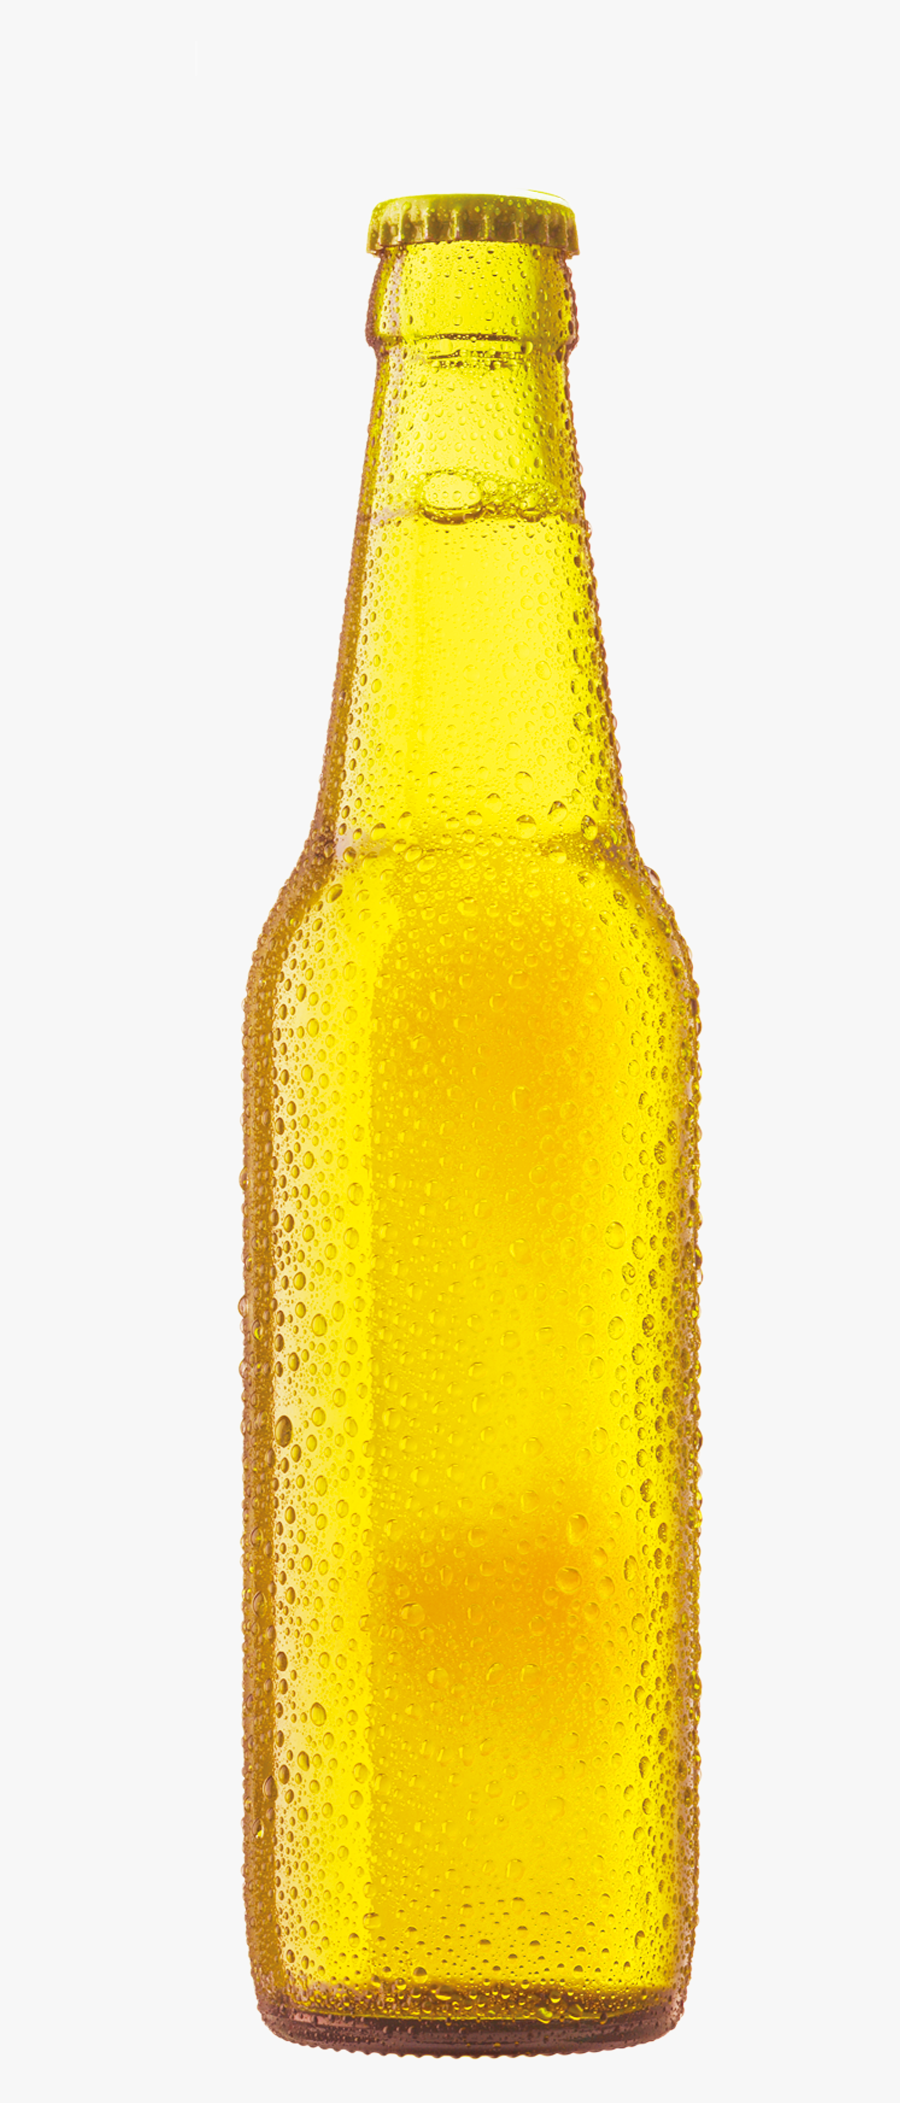 Beer Bottle Cup Free Clipart Hq Clipart - Beer, Transparent Clipart